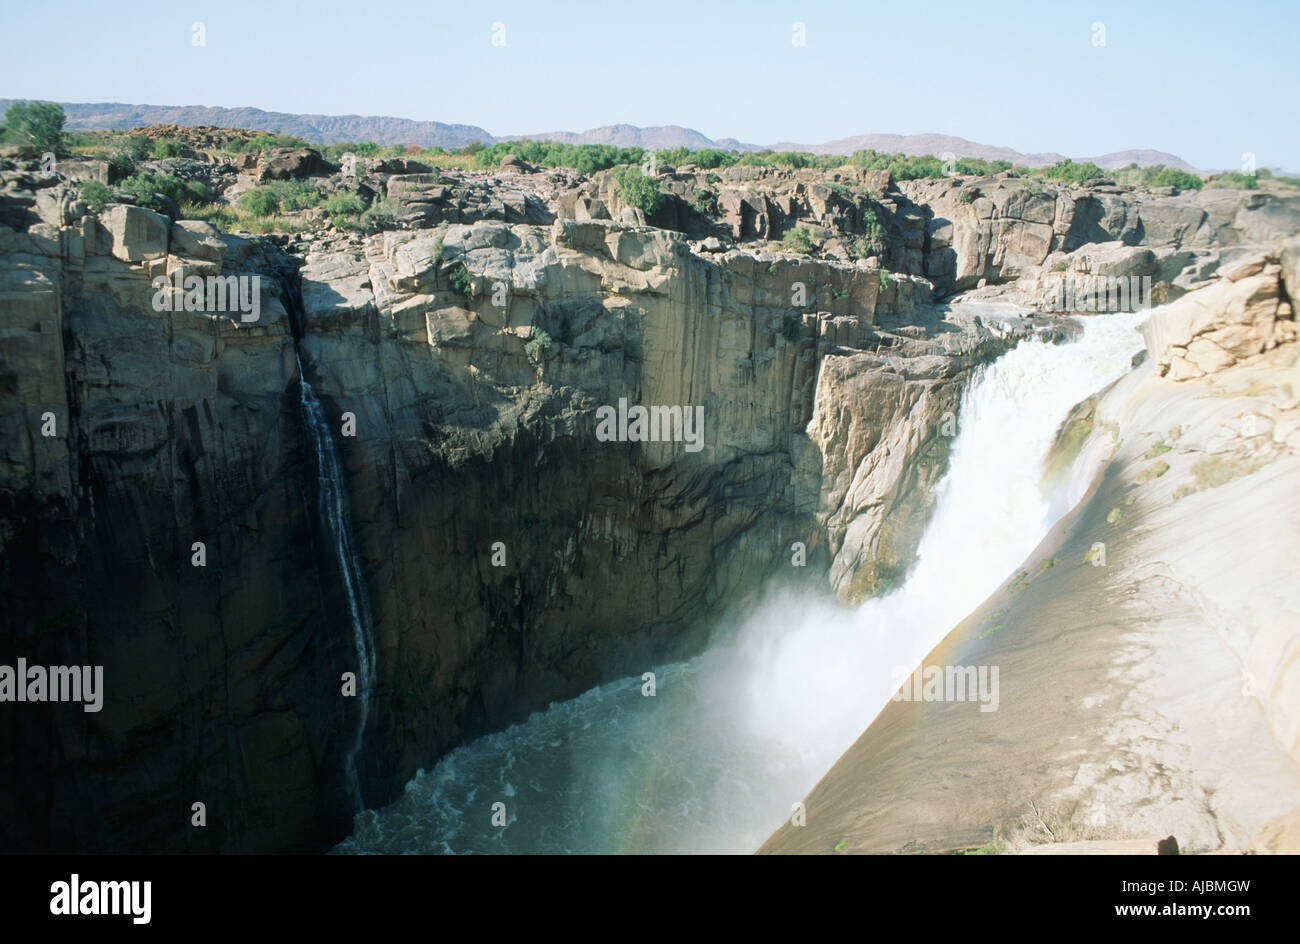 Scenic View of Waterfall and Gorge Stock Photo